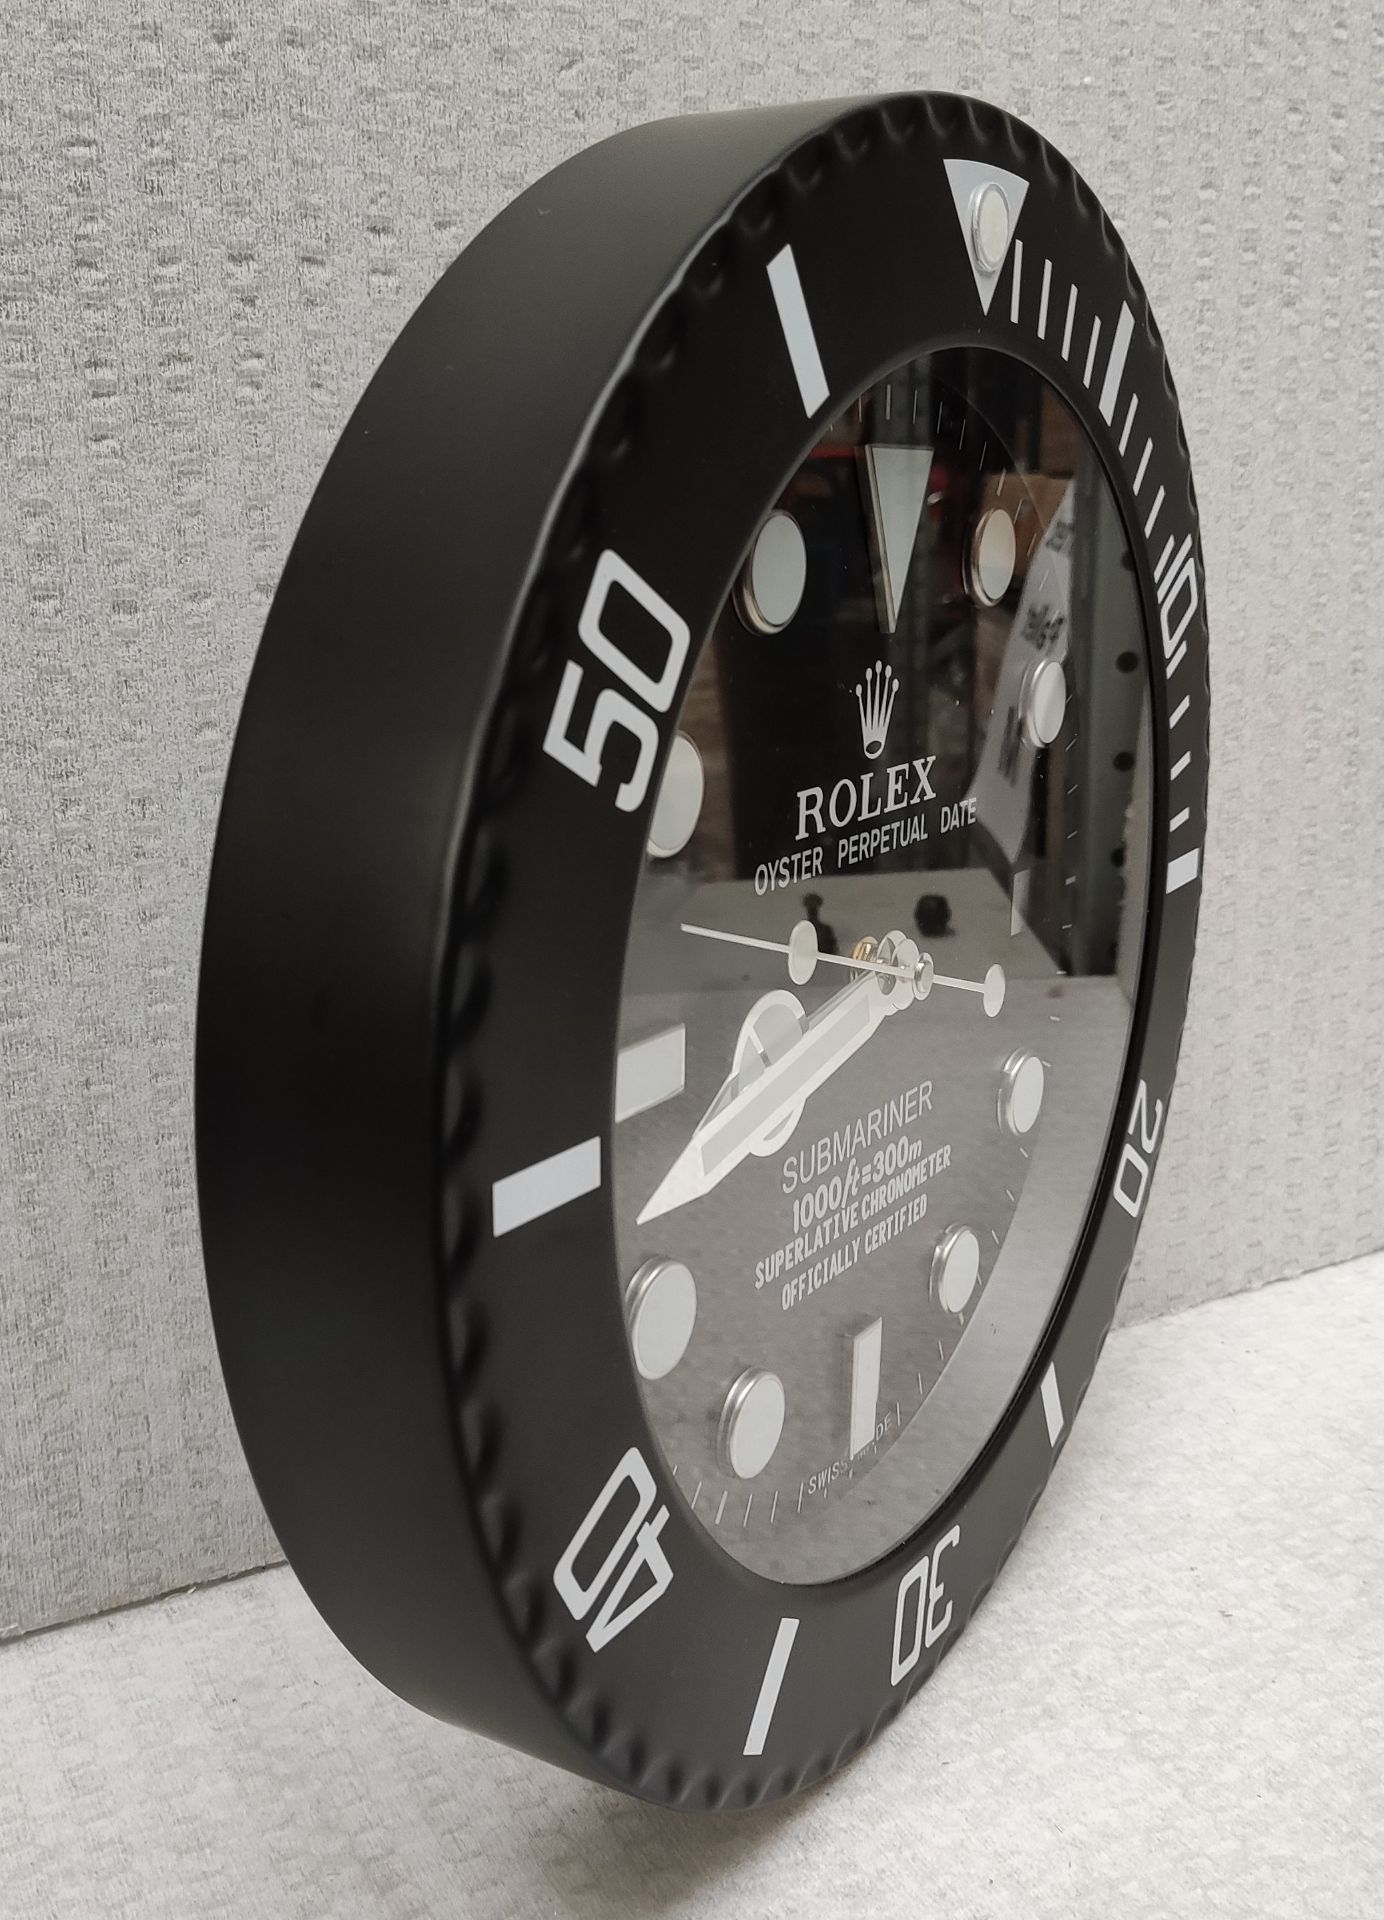 1 x Rolex Submariner Dealer Only Wall Clock - CL444 - Location: Altrincham WA14 Fully working and in - Image 13 of 13